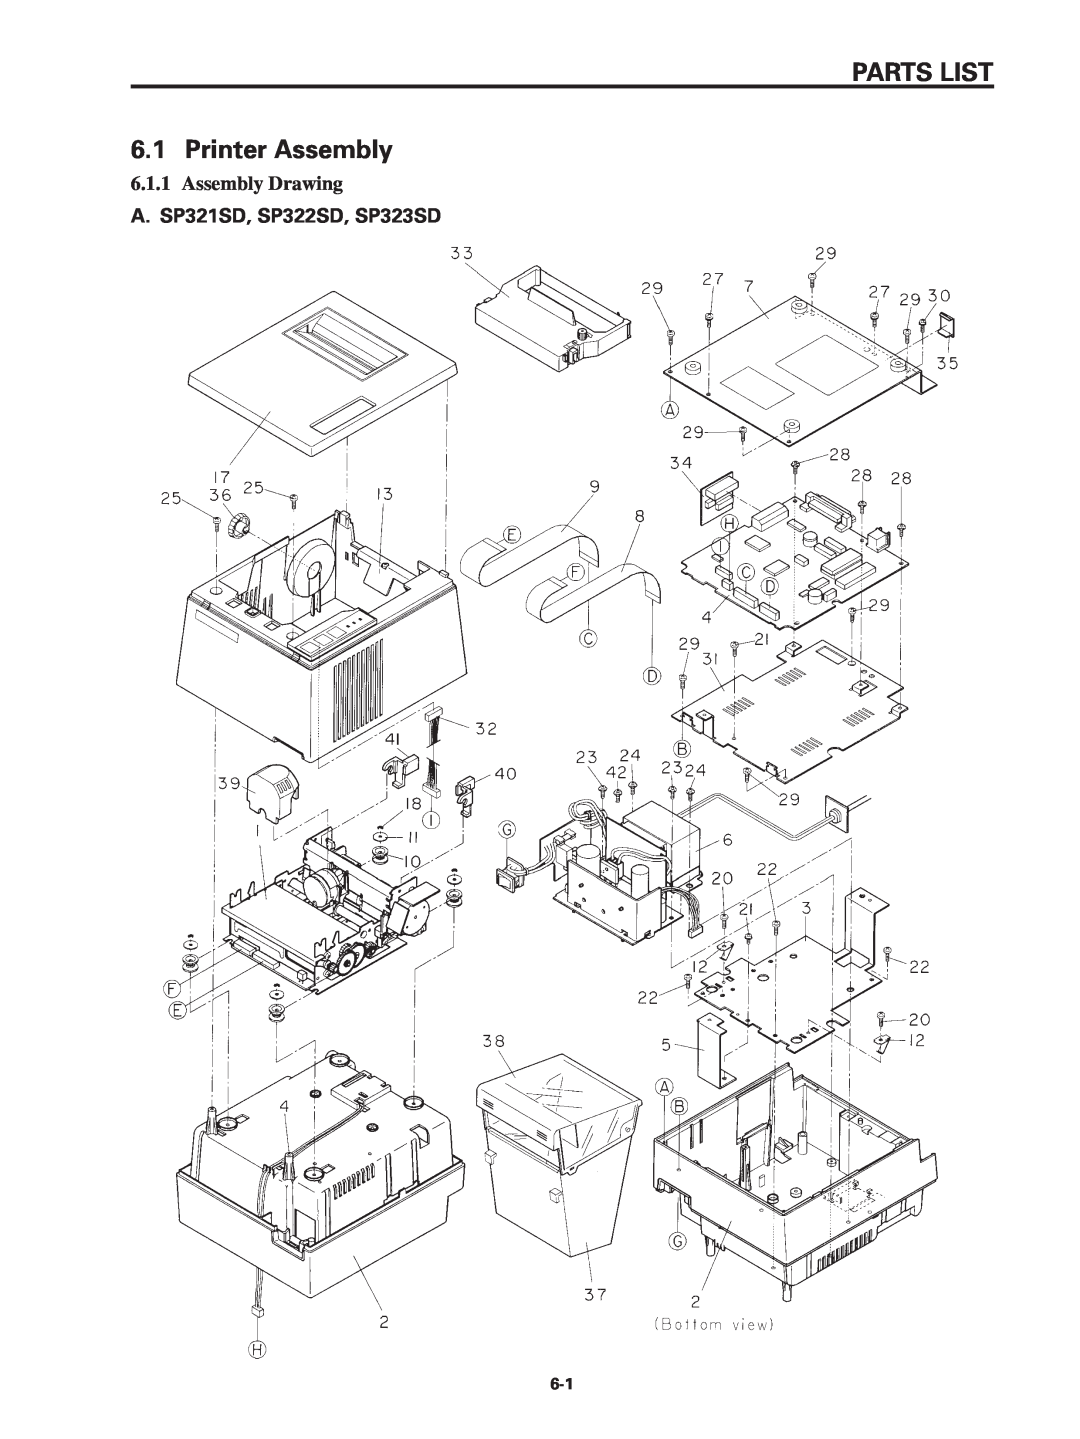 Star Micronics SP320S technical manual PARTS LIST 6.1 Printer Assembly, Assembly Drawing, A. SP321SD, SP322SD, SP323SD 